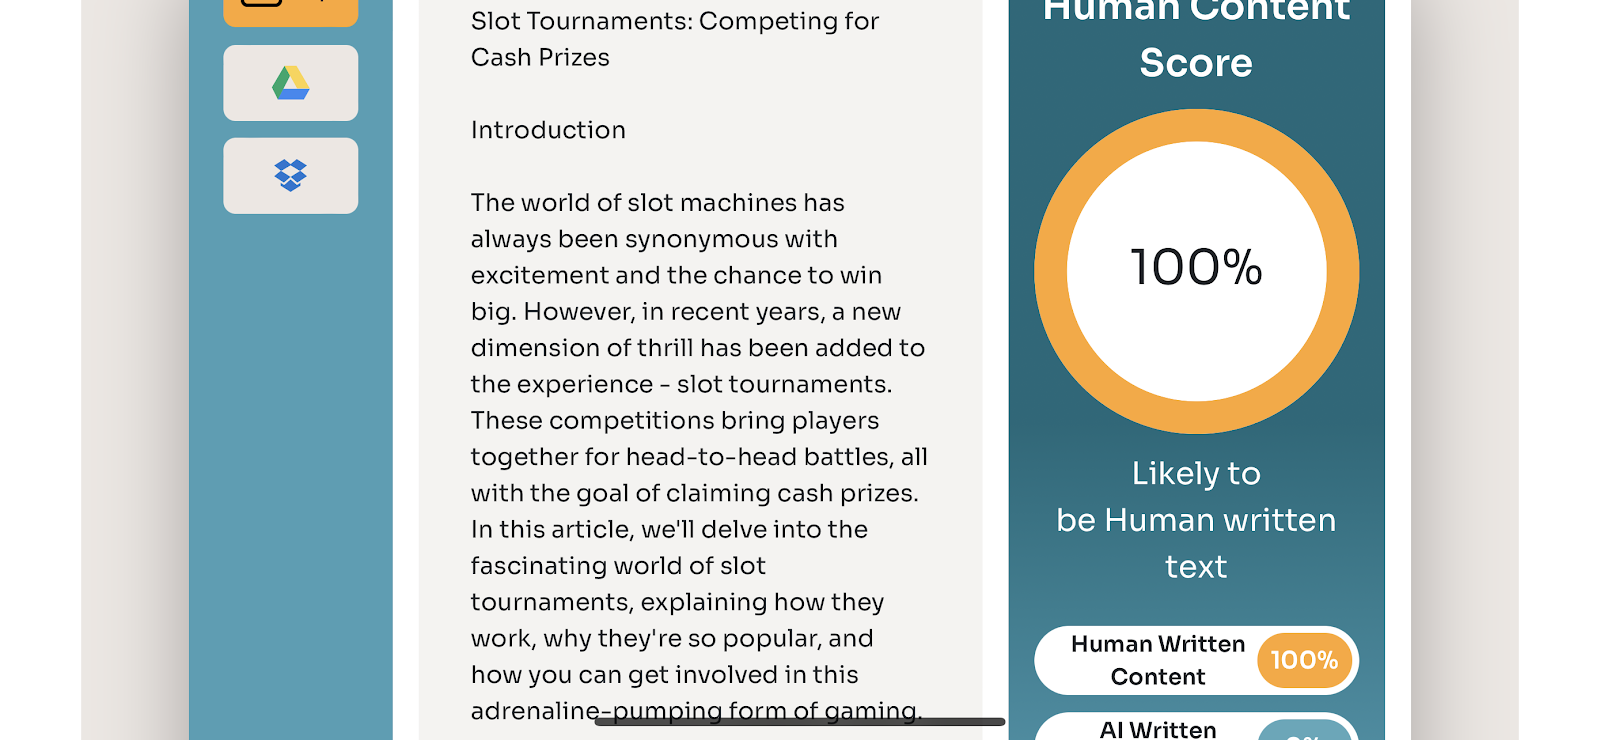 Slot Tournaments: Competing for Cash Prizes